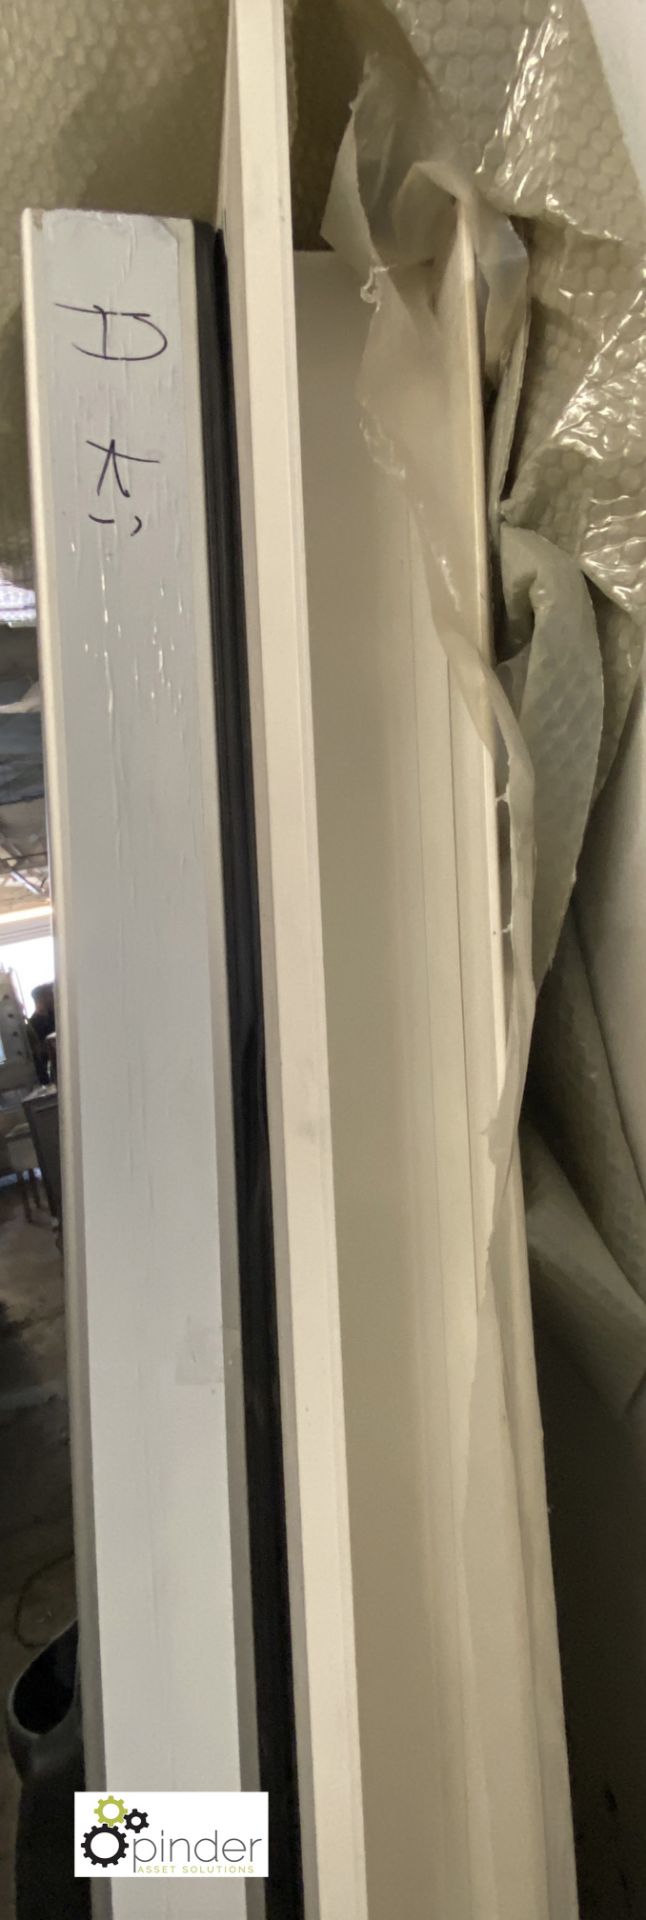 Insulated Cold Room Door, with frame, lock, 3 hinges, frame 2140mm x 1500mm, door 1365mm x 1960mm, - Image 3 of 6